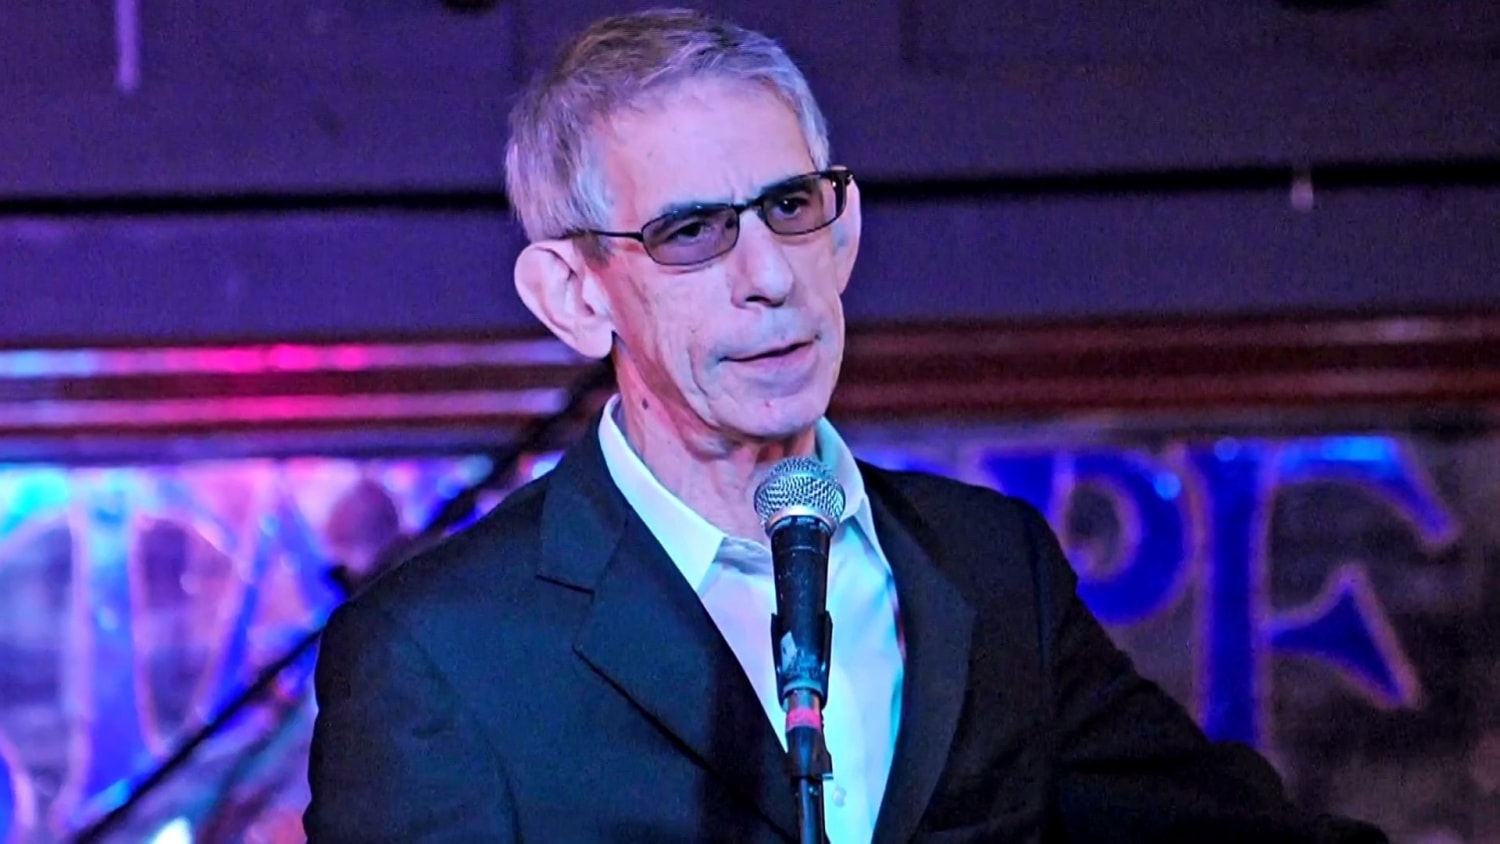 This post is dedicated to Richard Belzer, who left us today at 78. :  r/badMovies